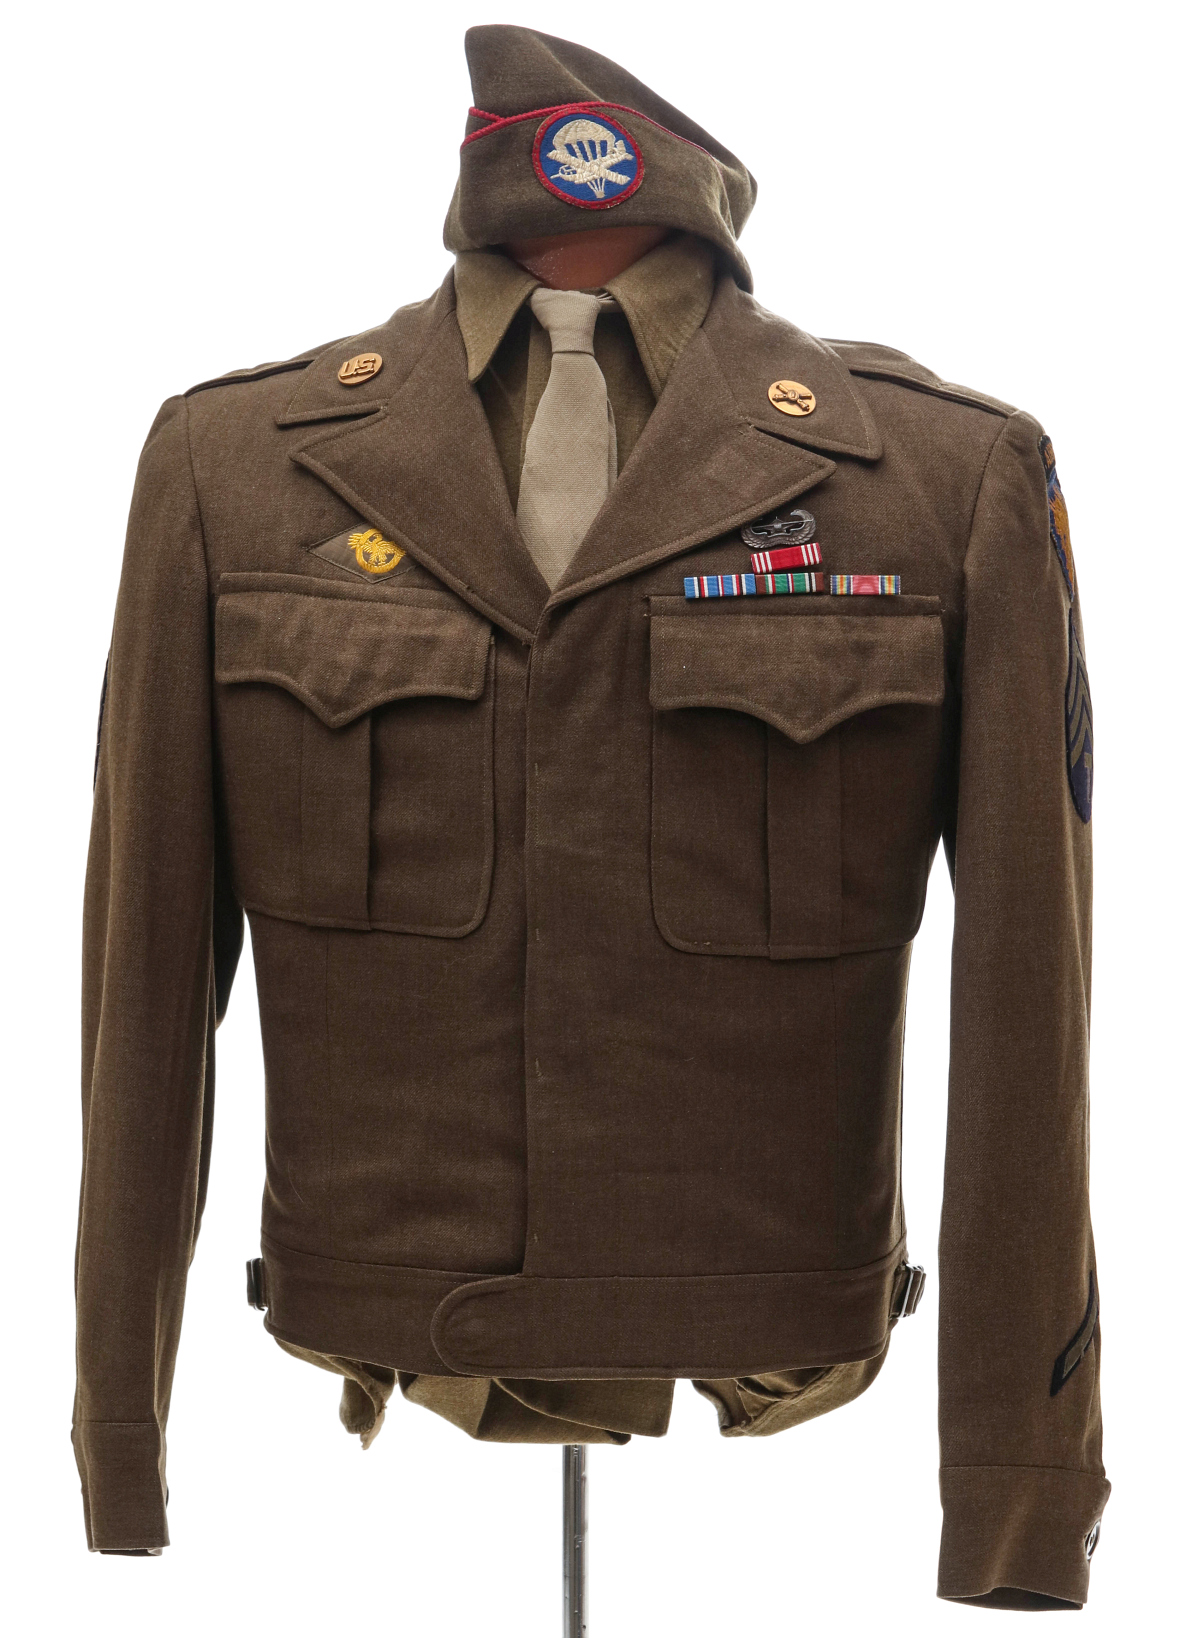 IKE UNIFORM WITH GLIDER WINGS, 13 AIRBORNE SSI